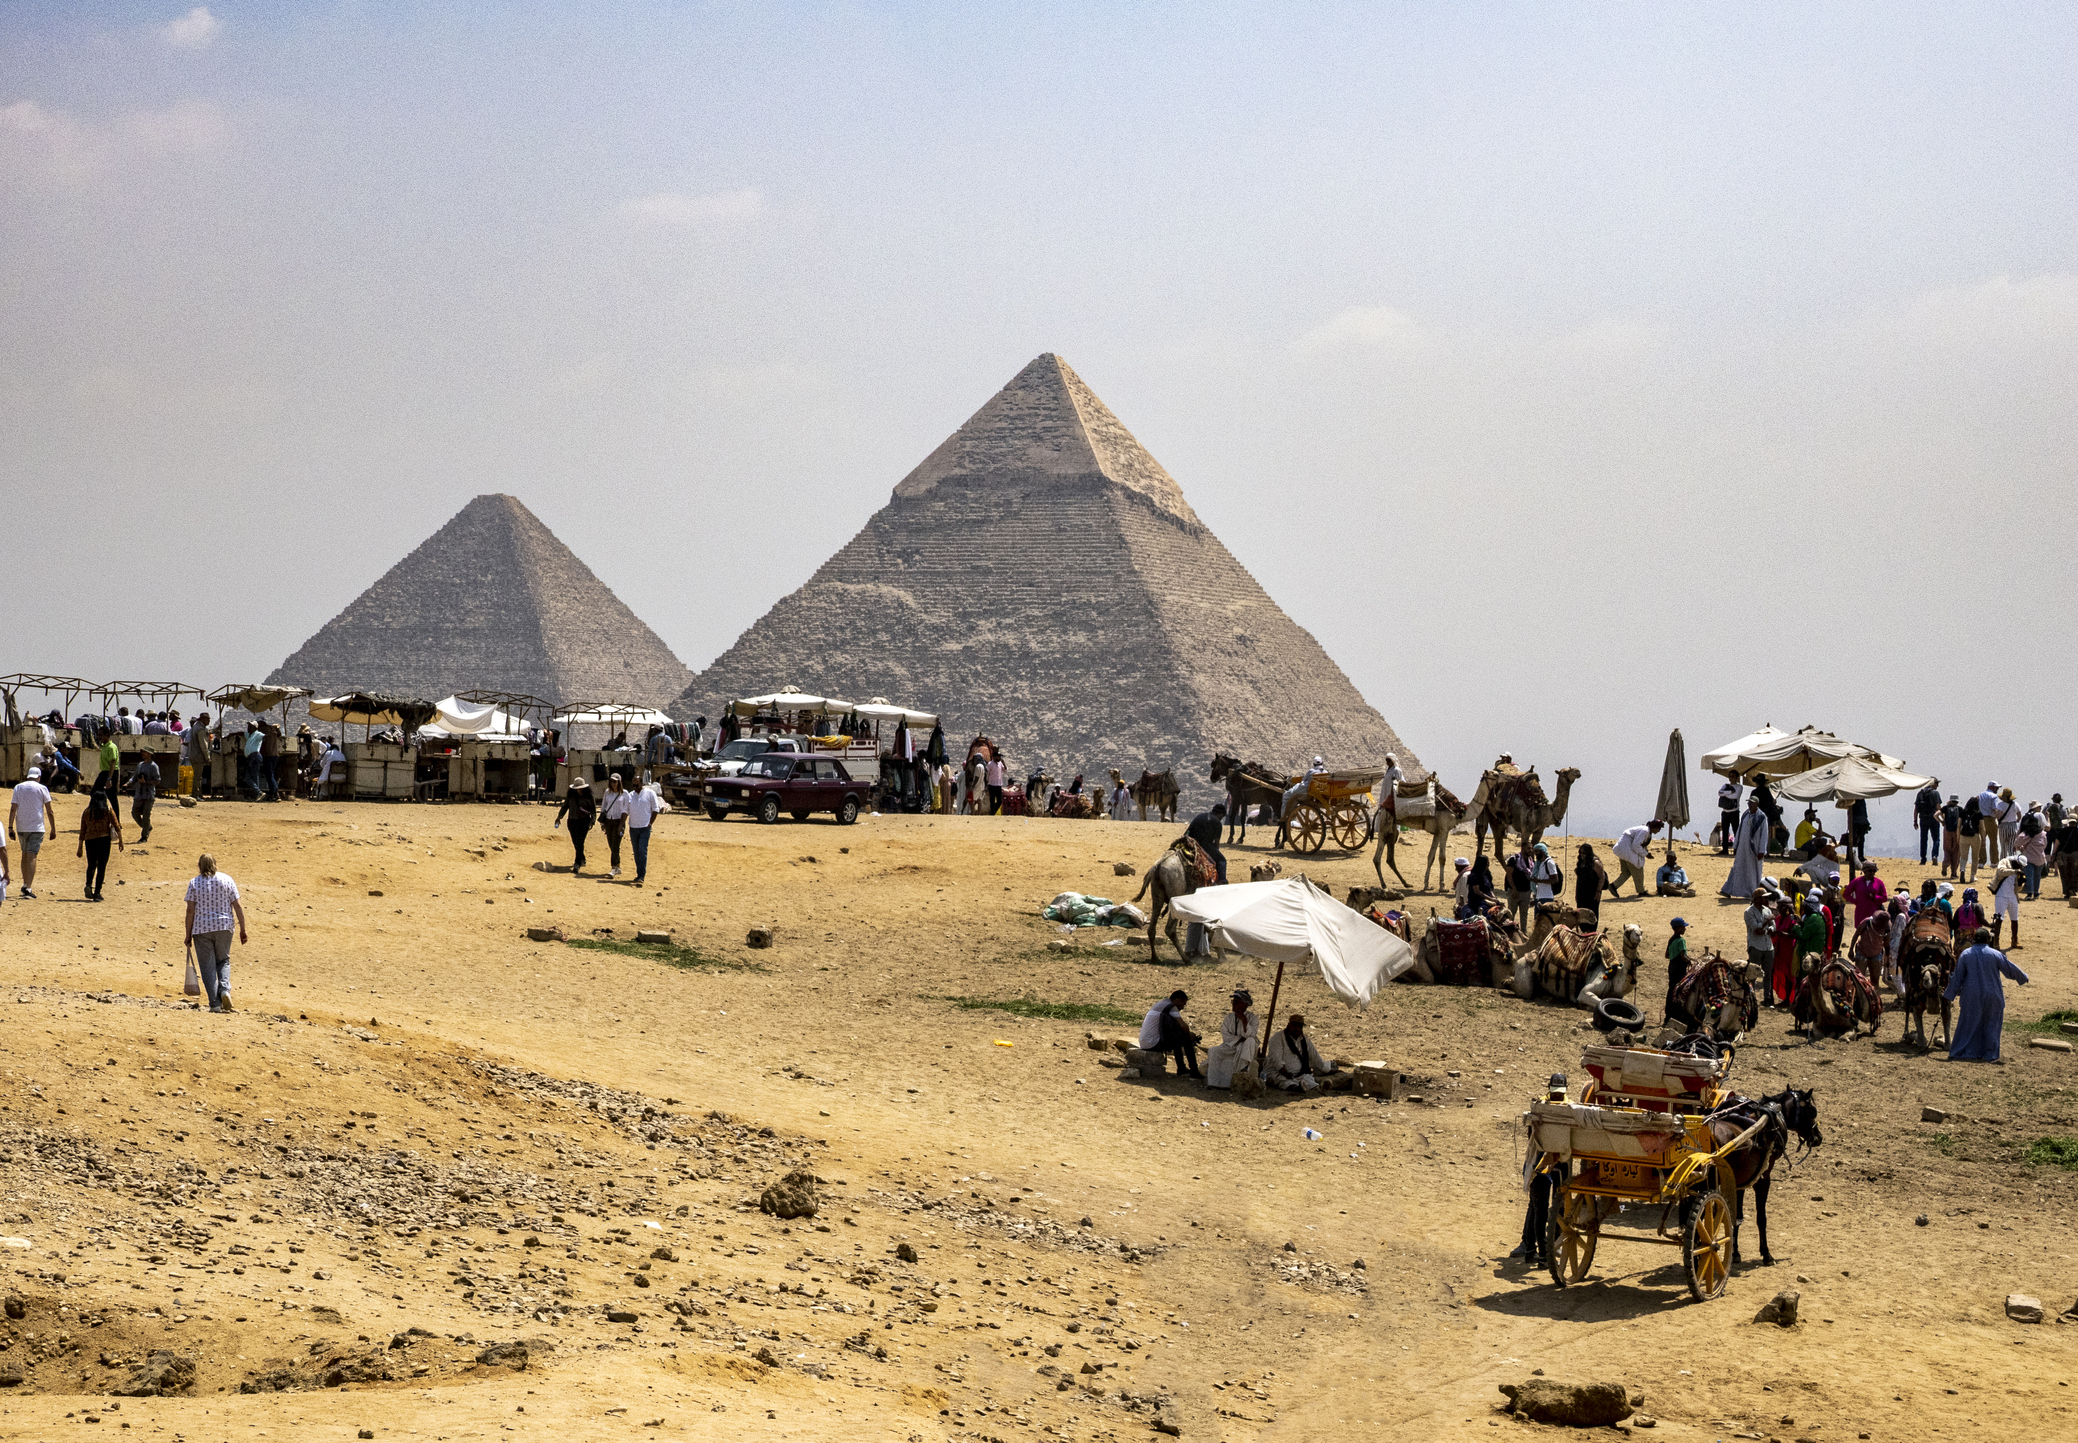 The Great Pyramids of Giza with tourists and camel rides in the foreground